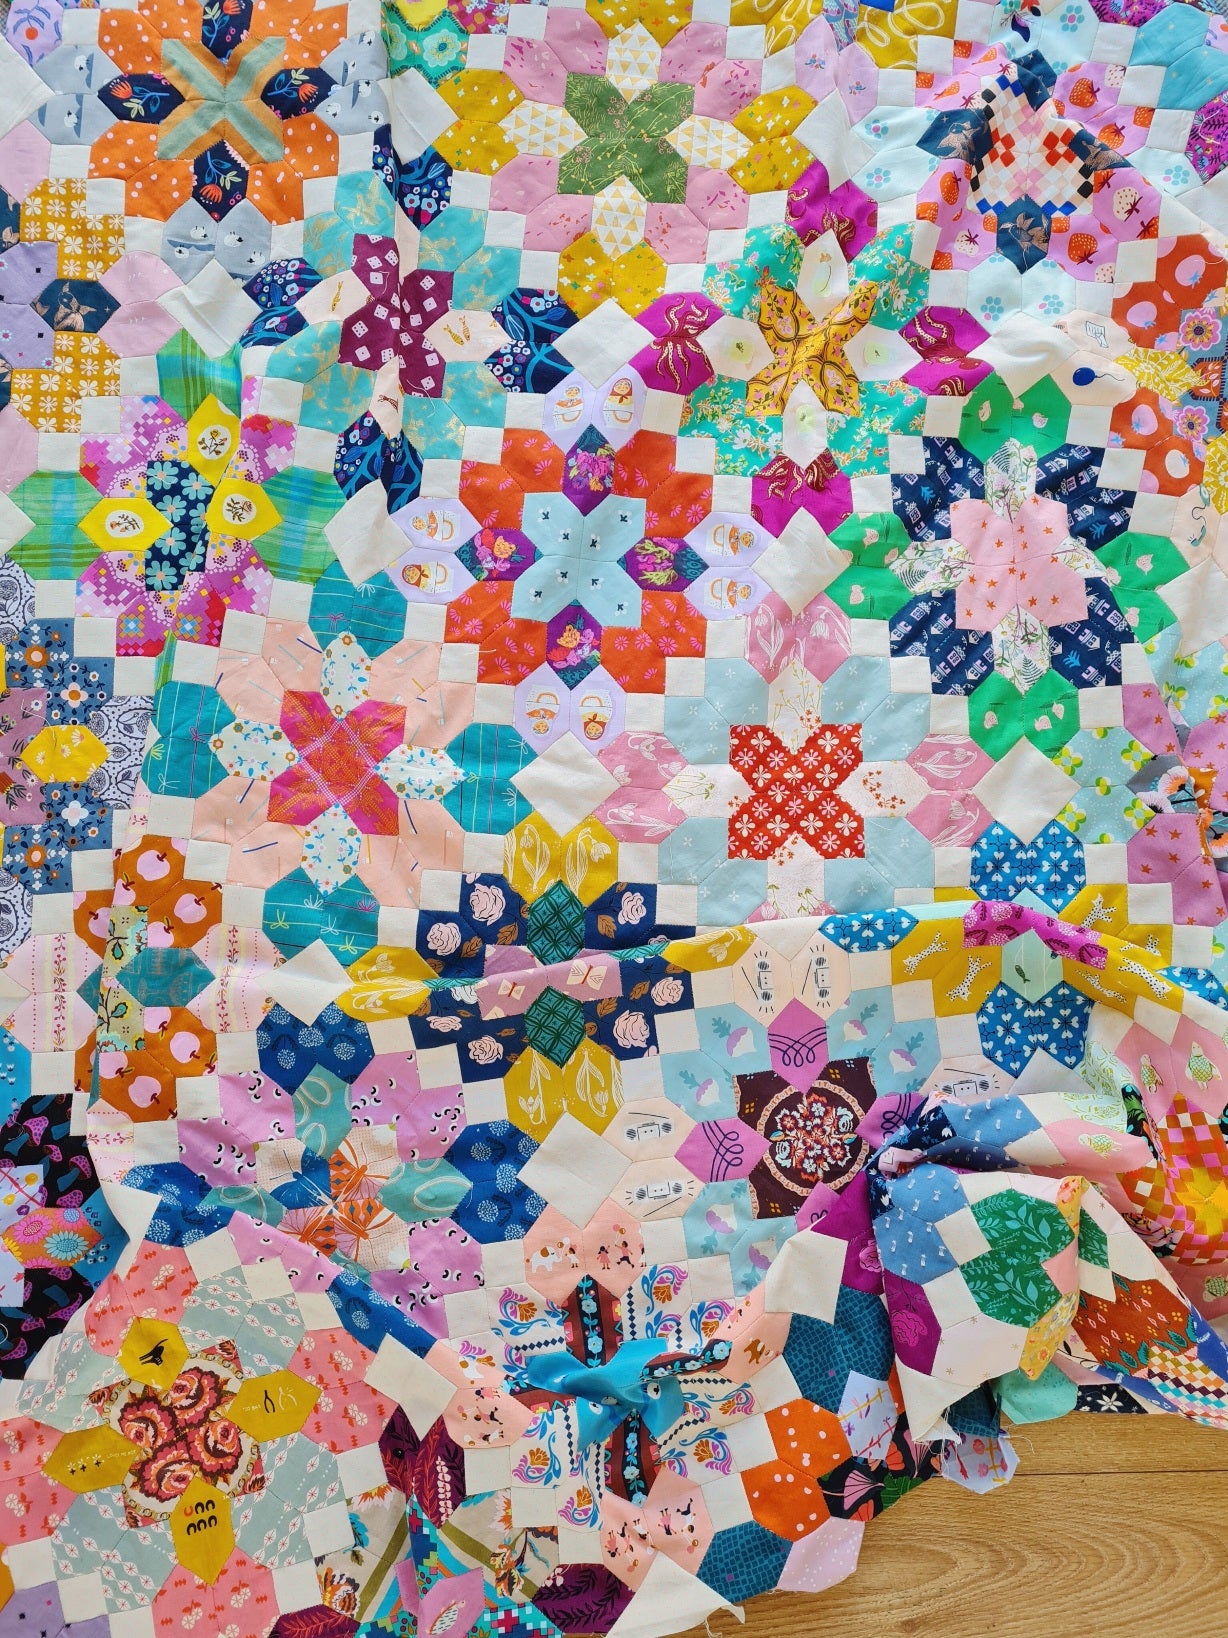 Naive Melody Quilt Pattern - Paper Pattern – Lucy Engels